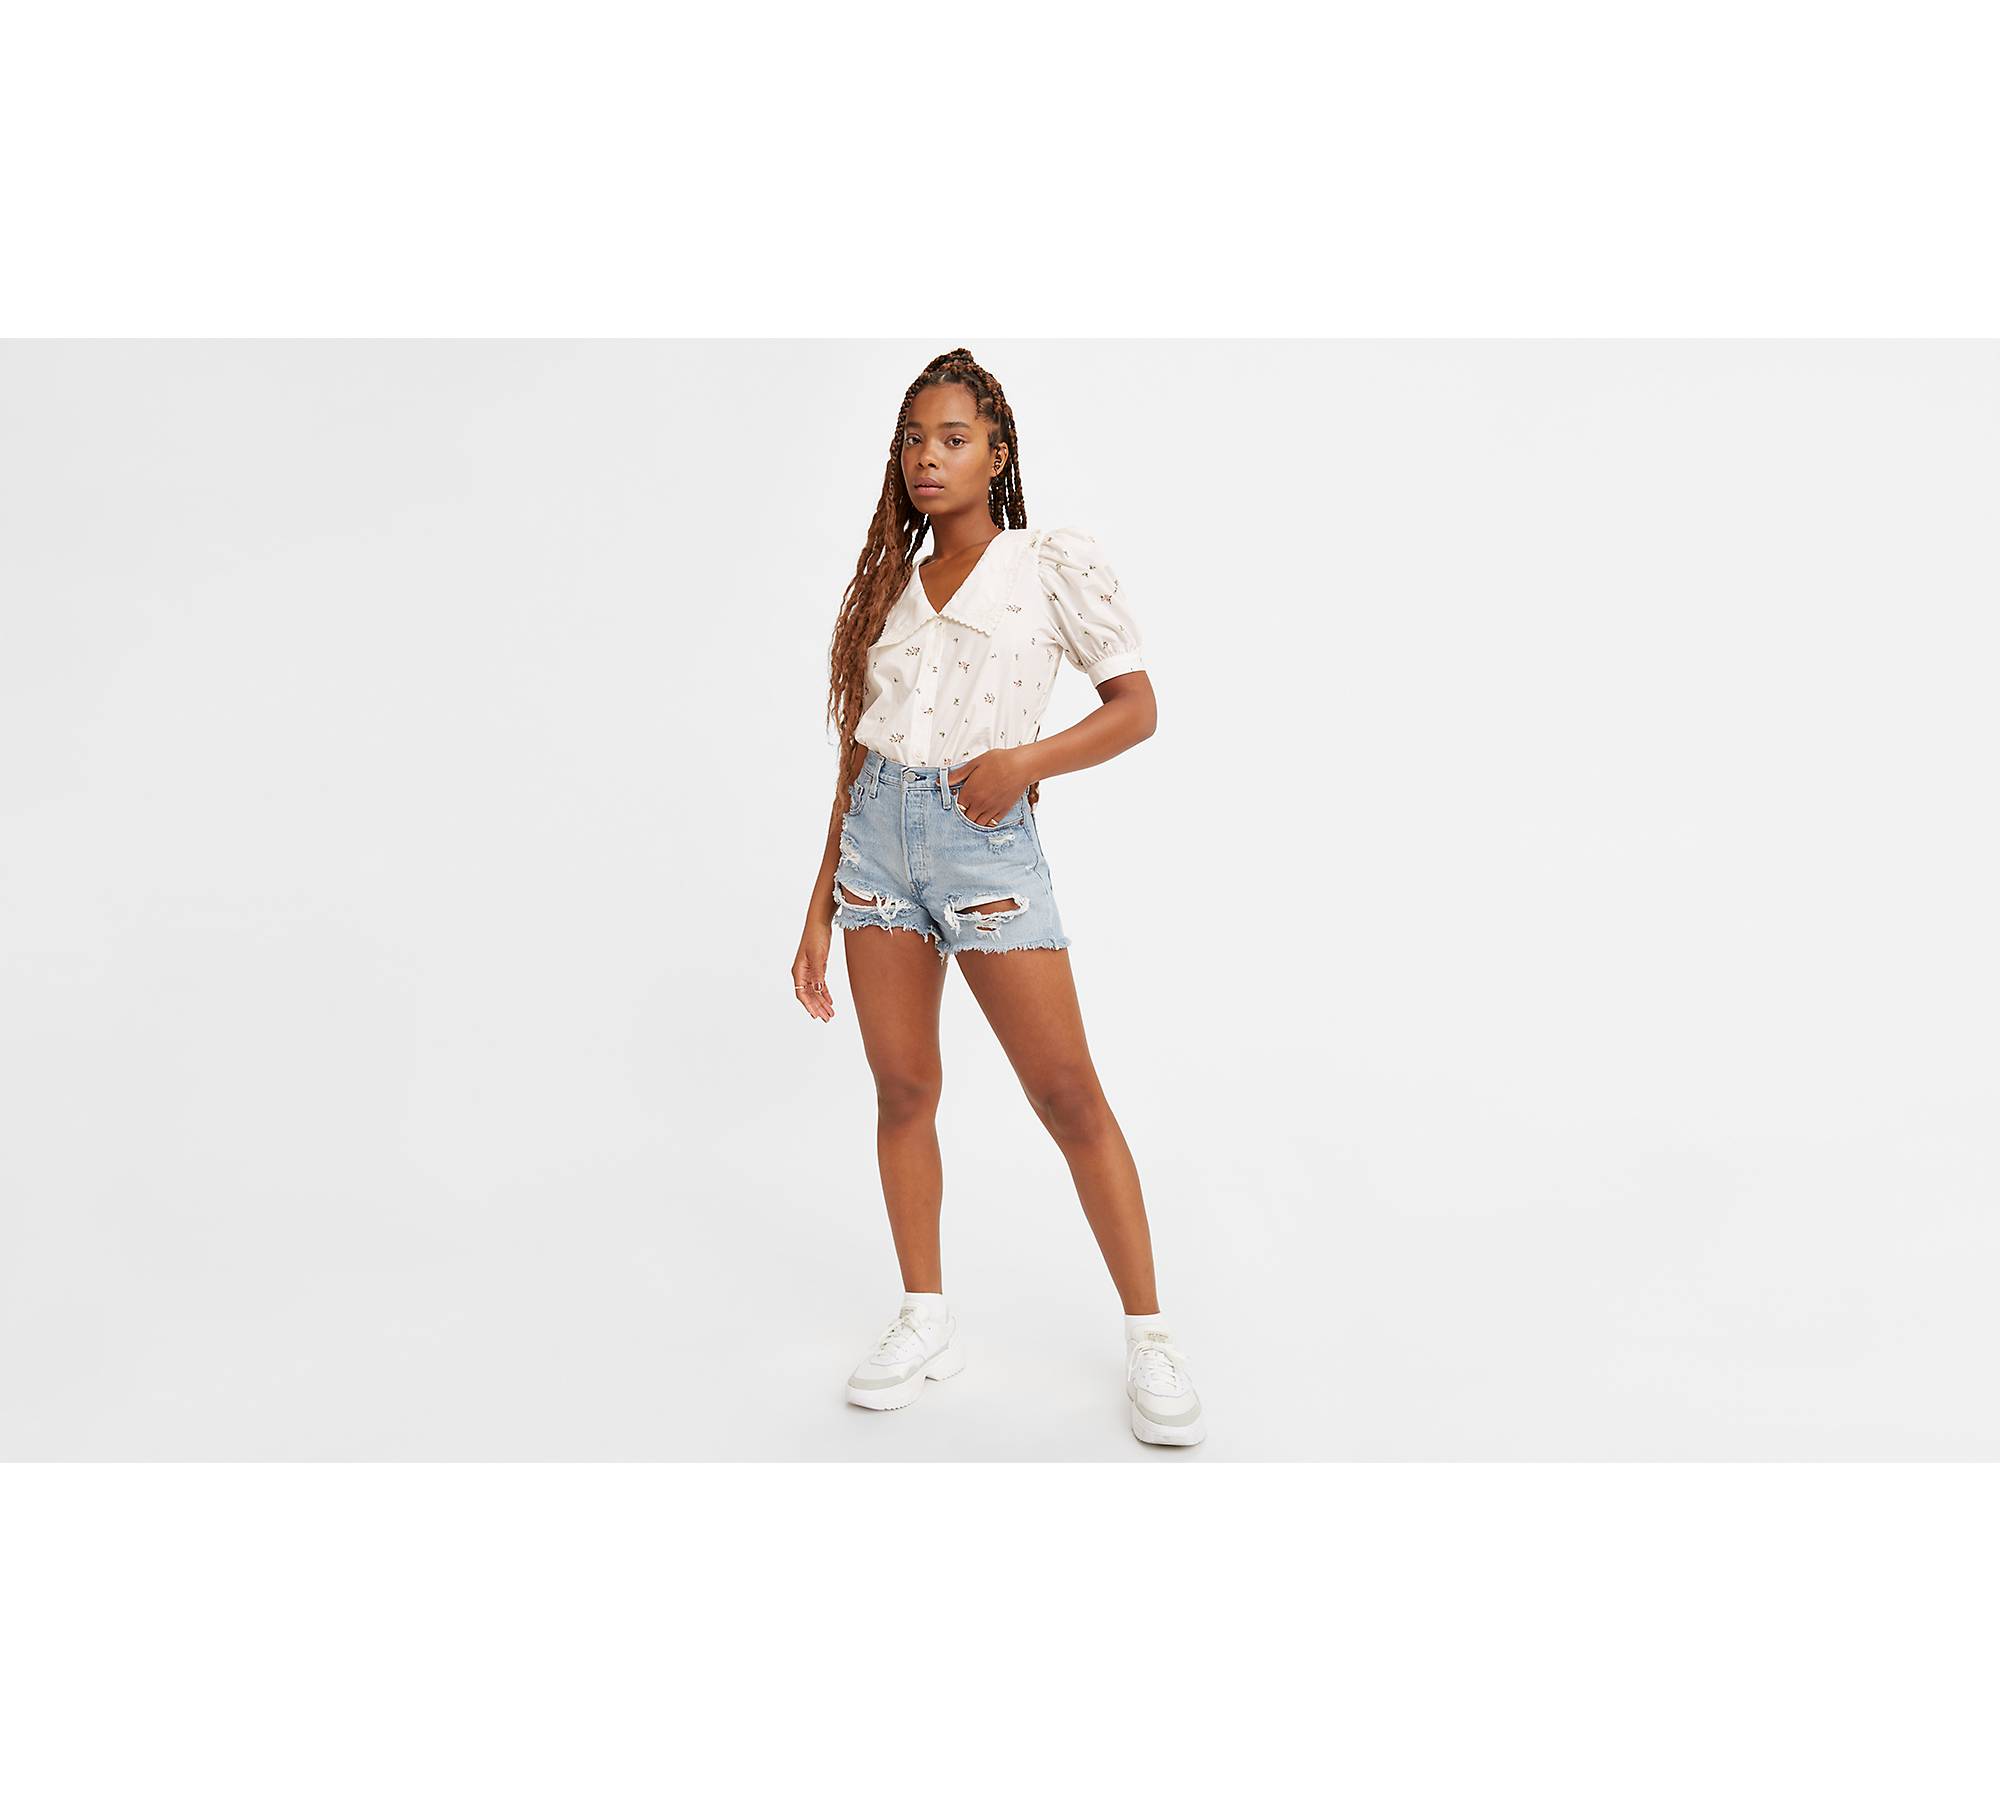 Stretch Jeans and Shorts, Comfort, Flex, and More